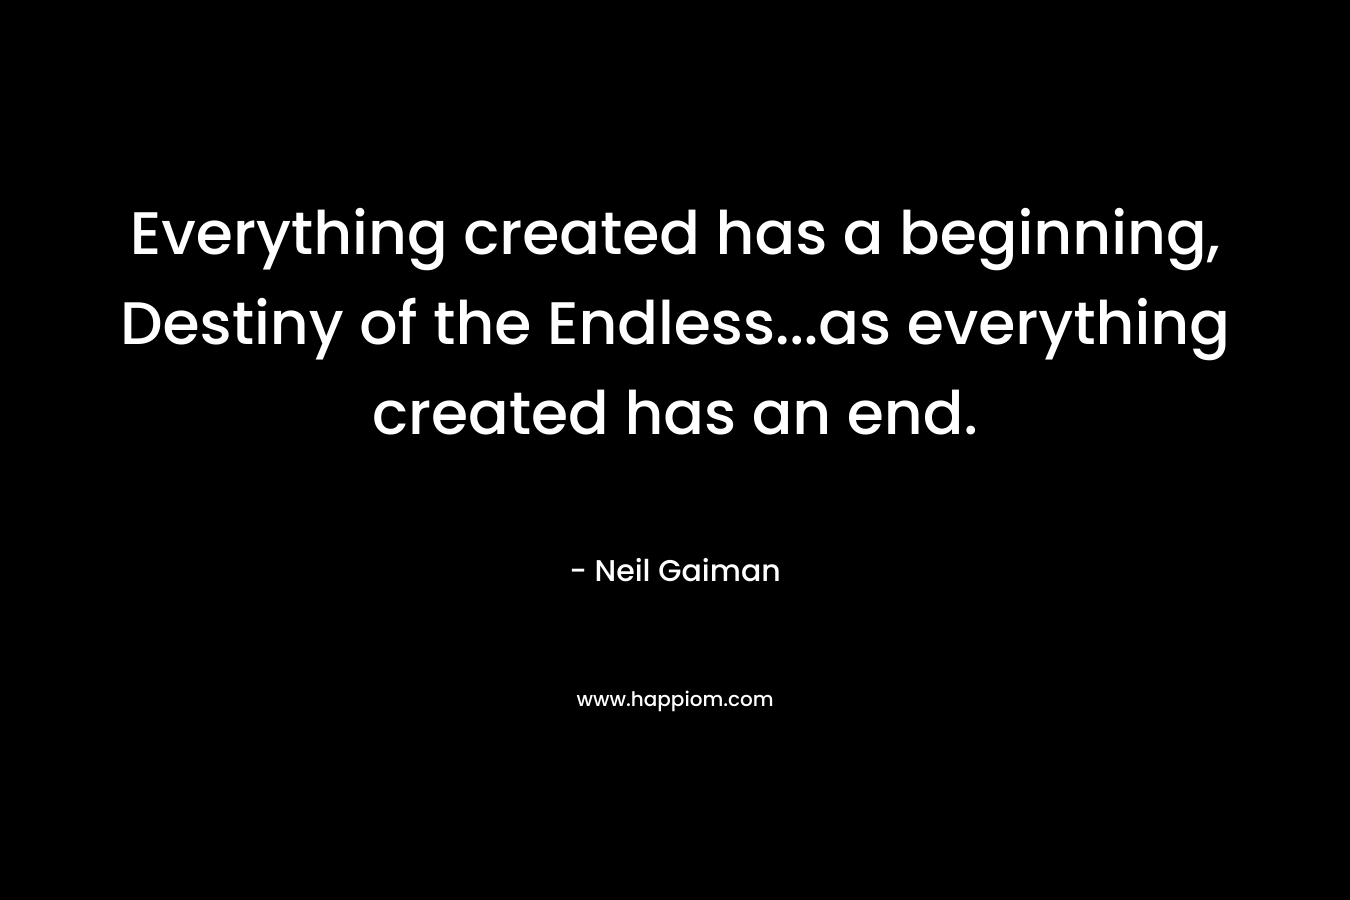 Everything created has a beginning, Destiny of the Endless...as everything created has an end.